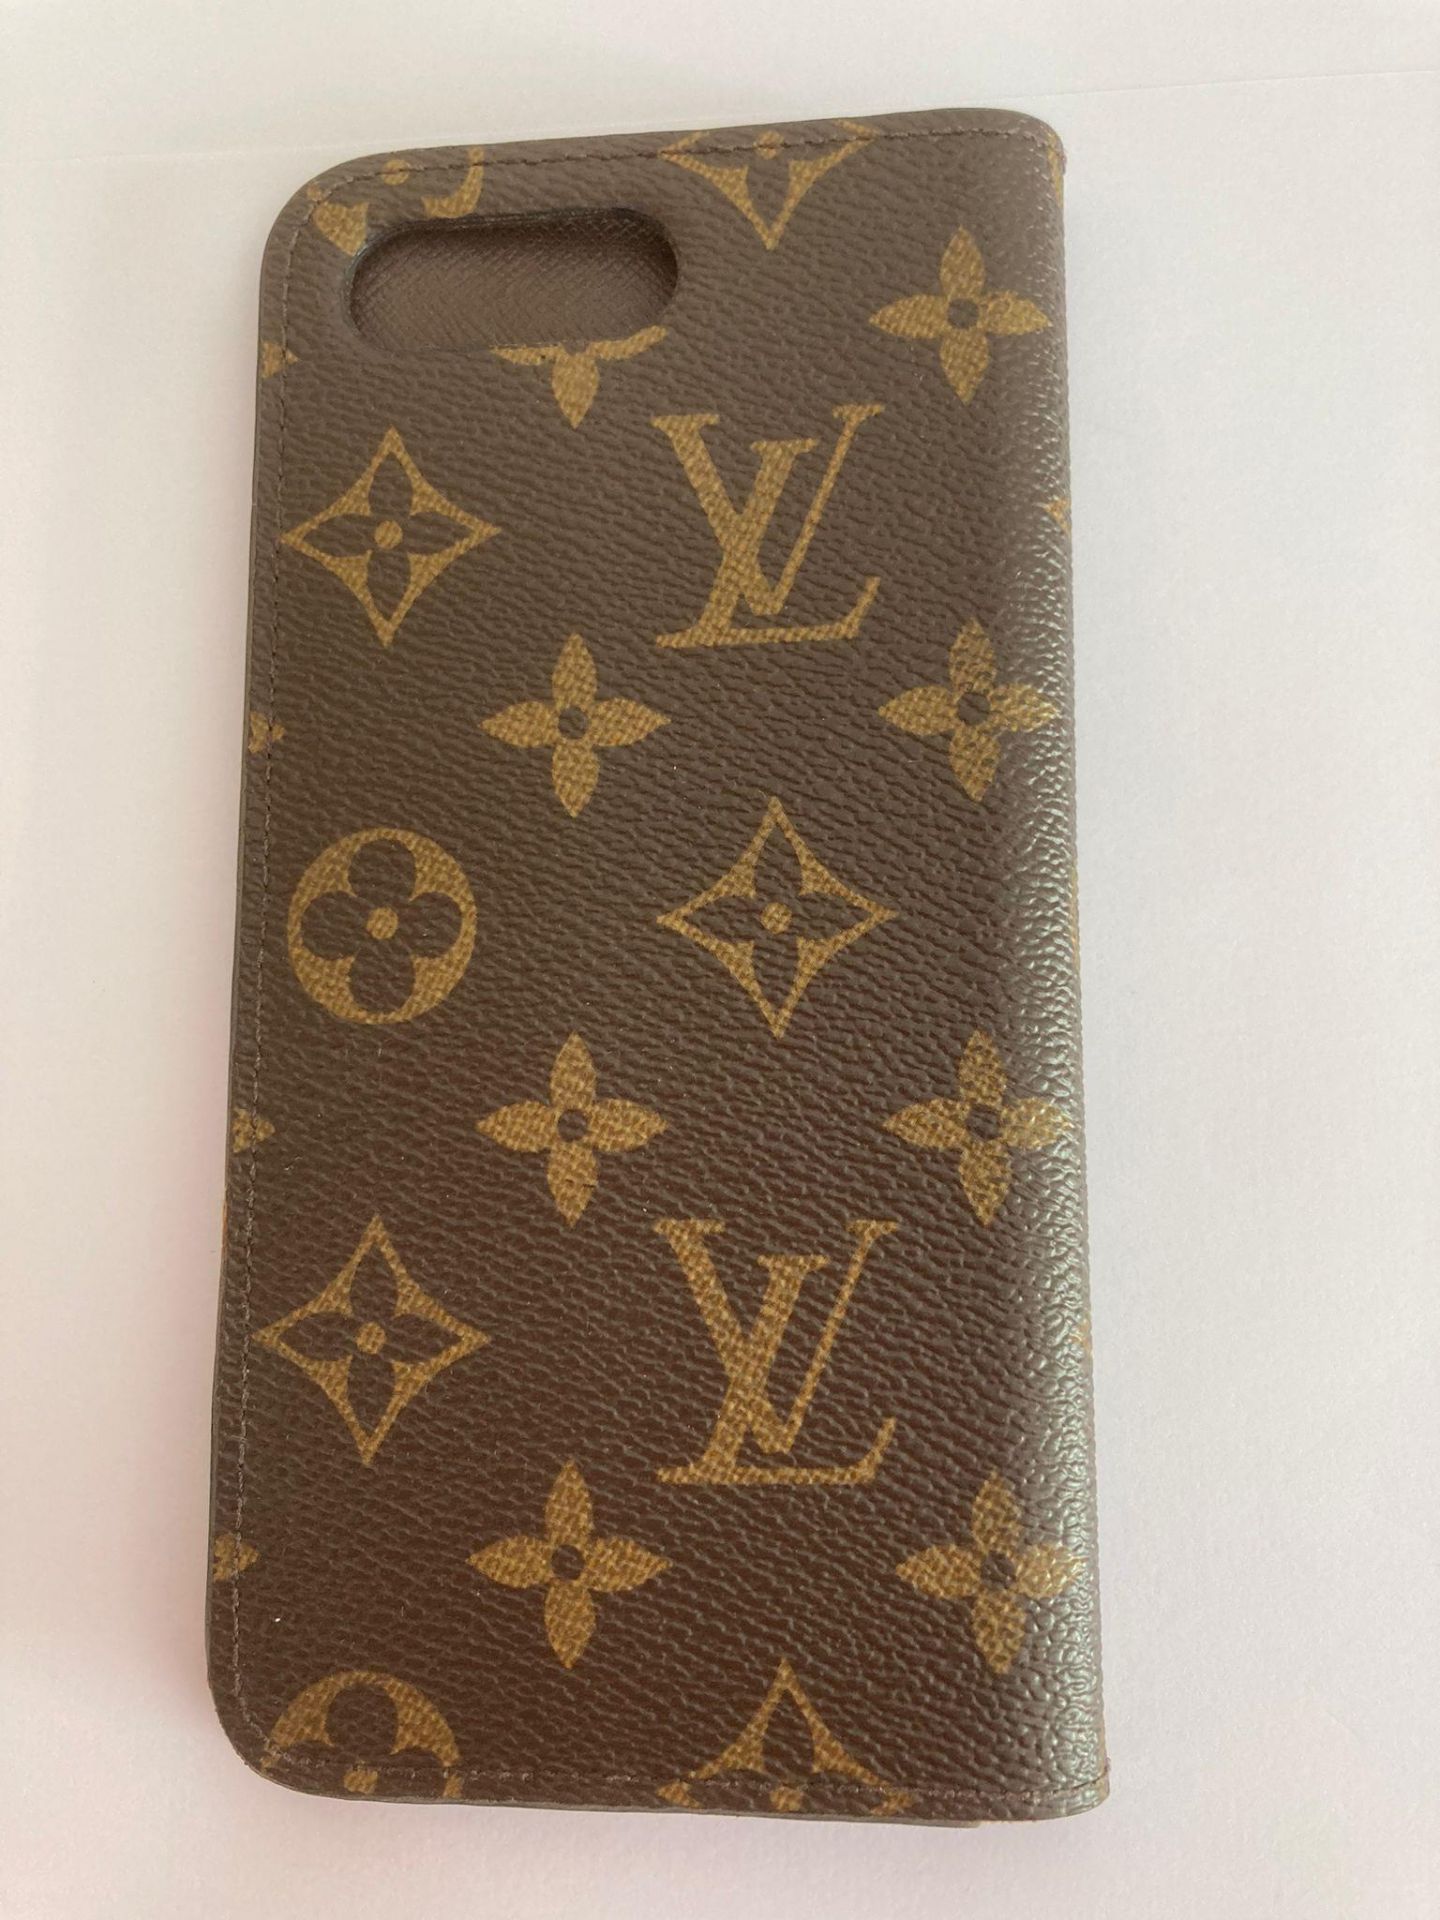 Genuine LOUIS VUITTON folio phone case for iPhone 7 or similar. Finished in brown leather with the - Bild 2 aus 3